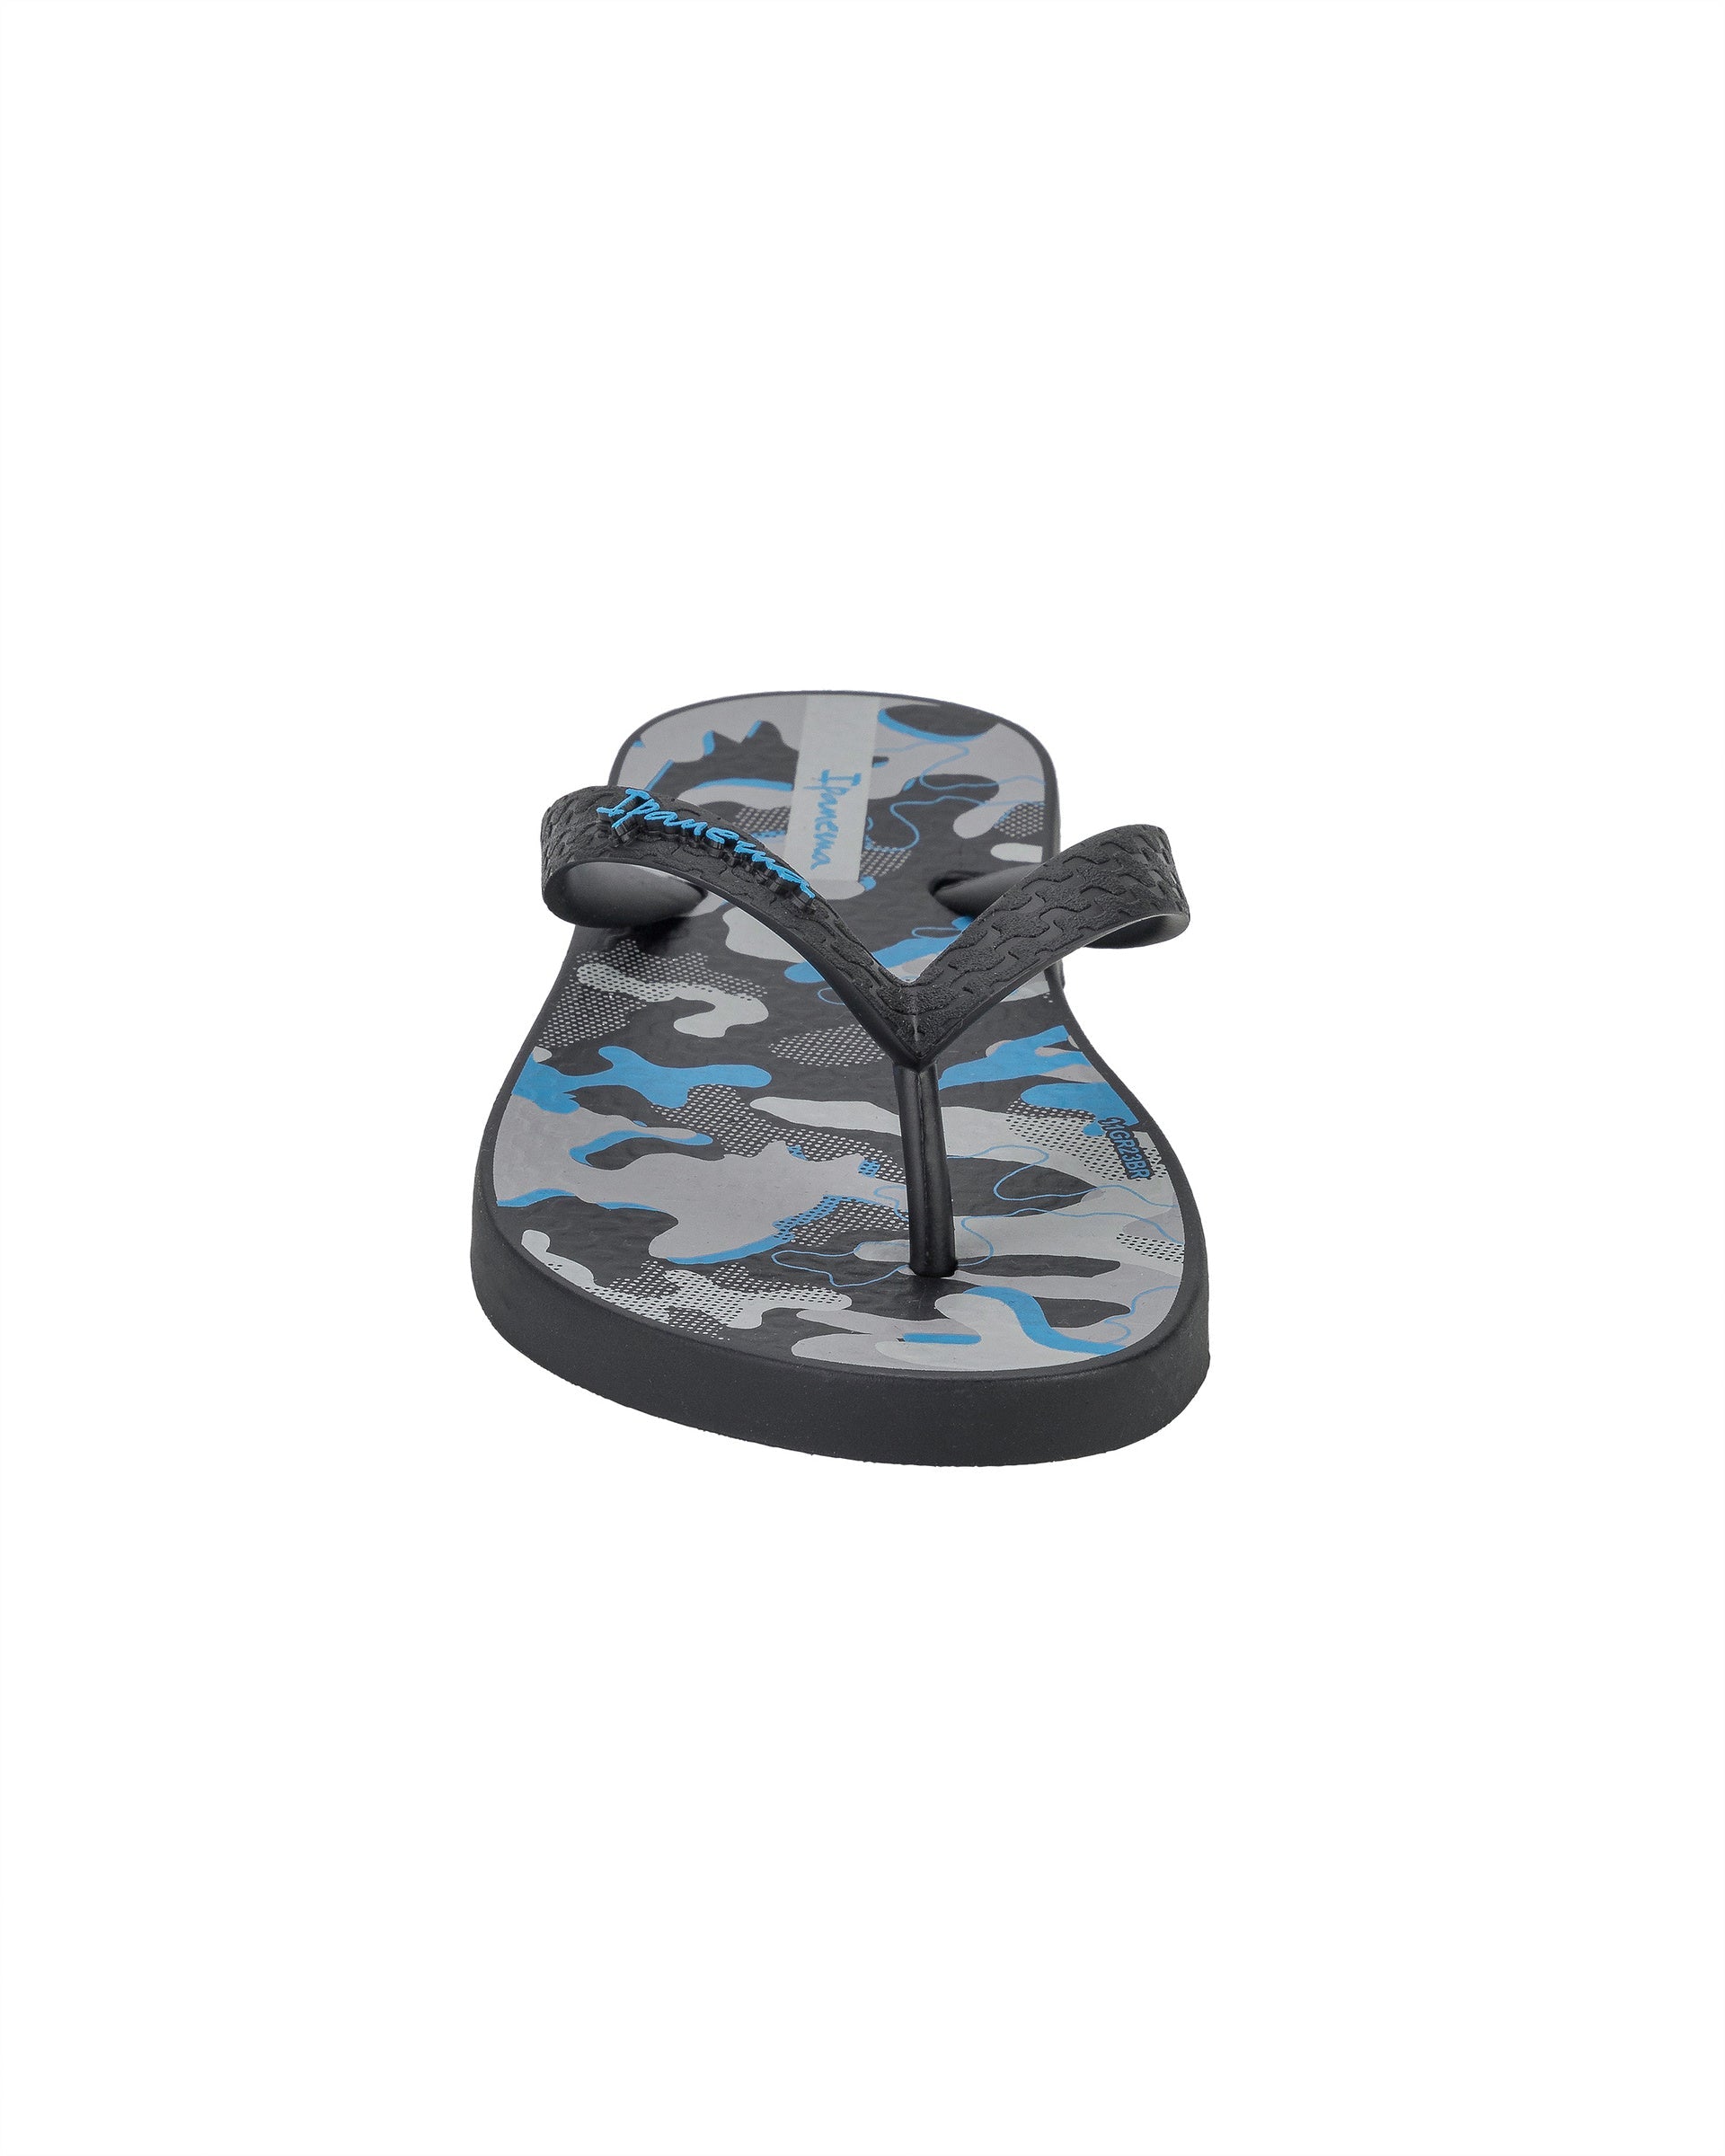 Front view of a black Ipanema Temas kids flip flop with camo print.